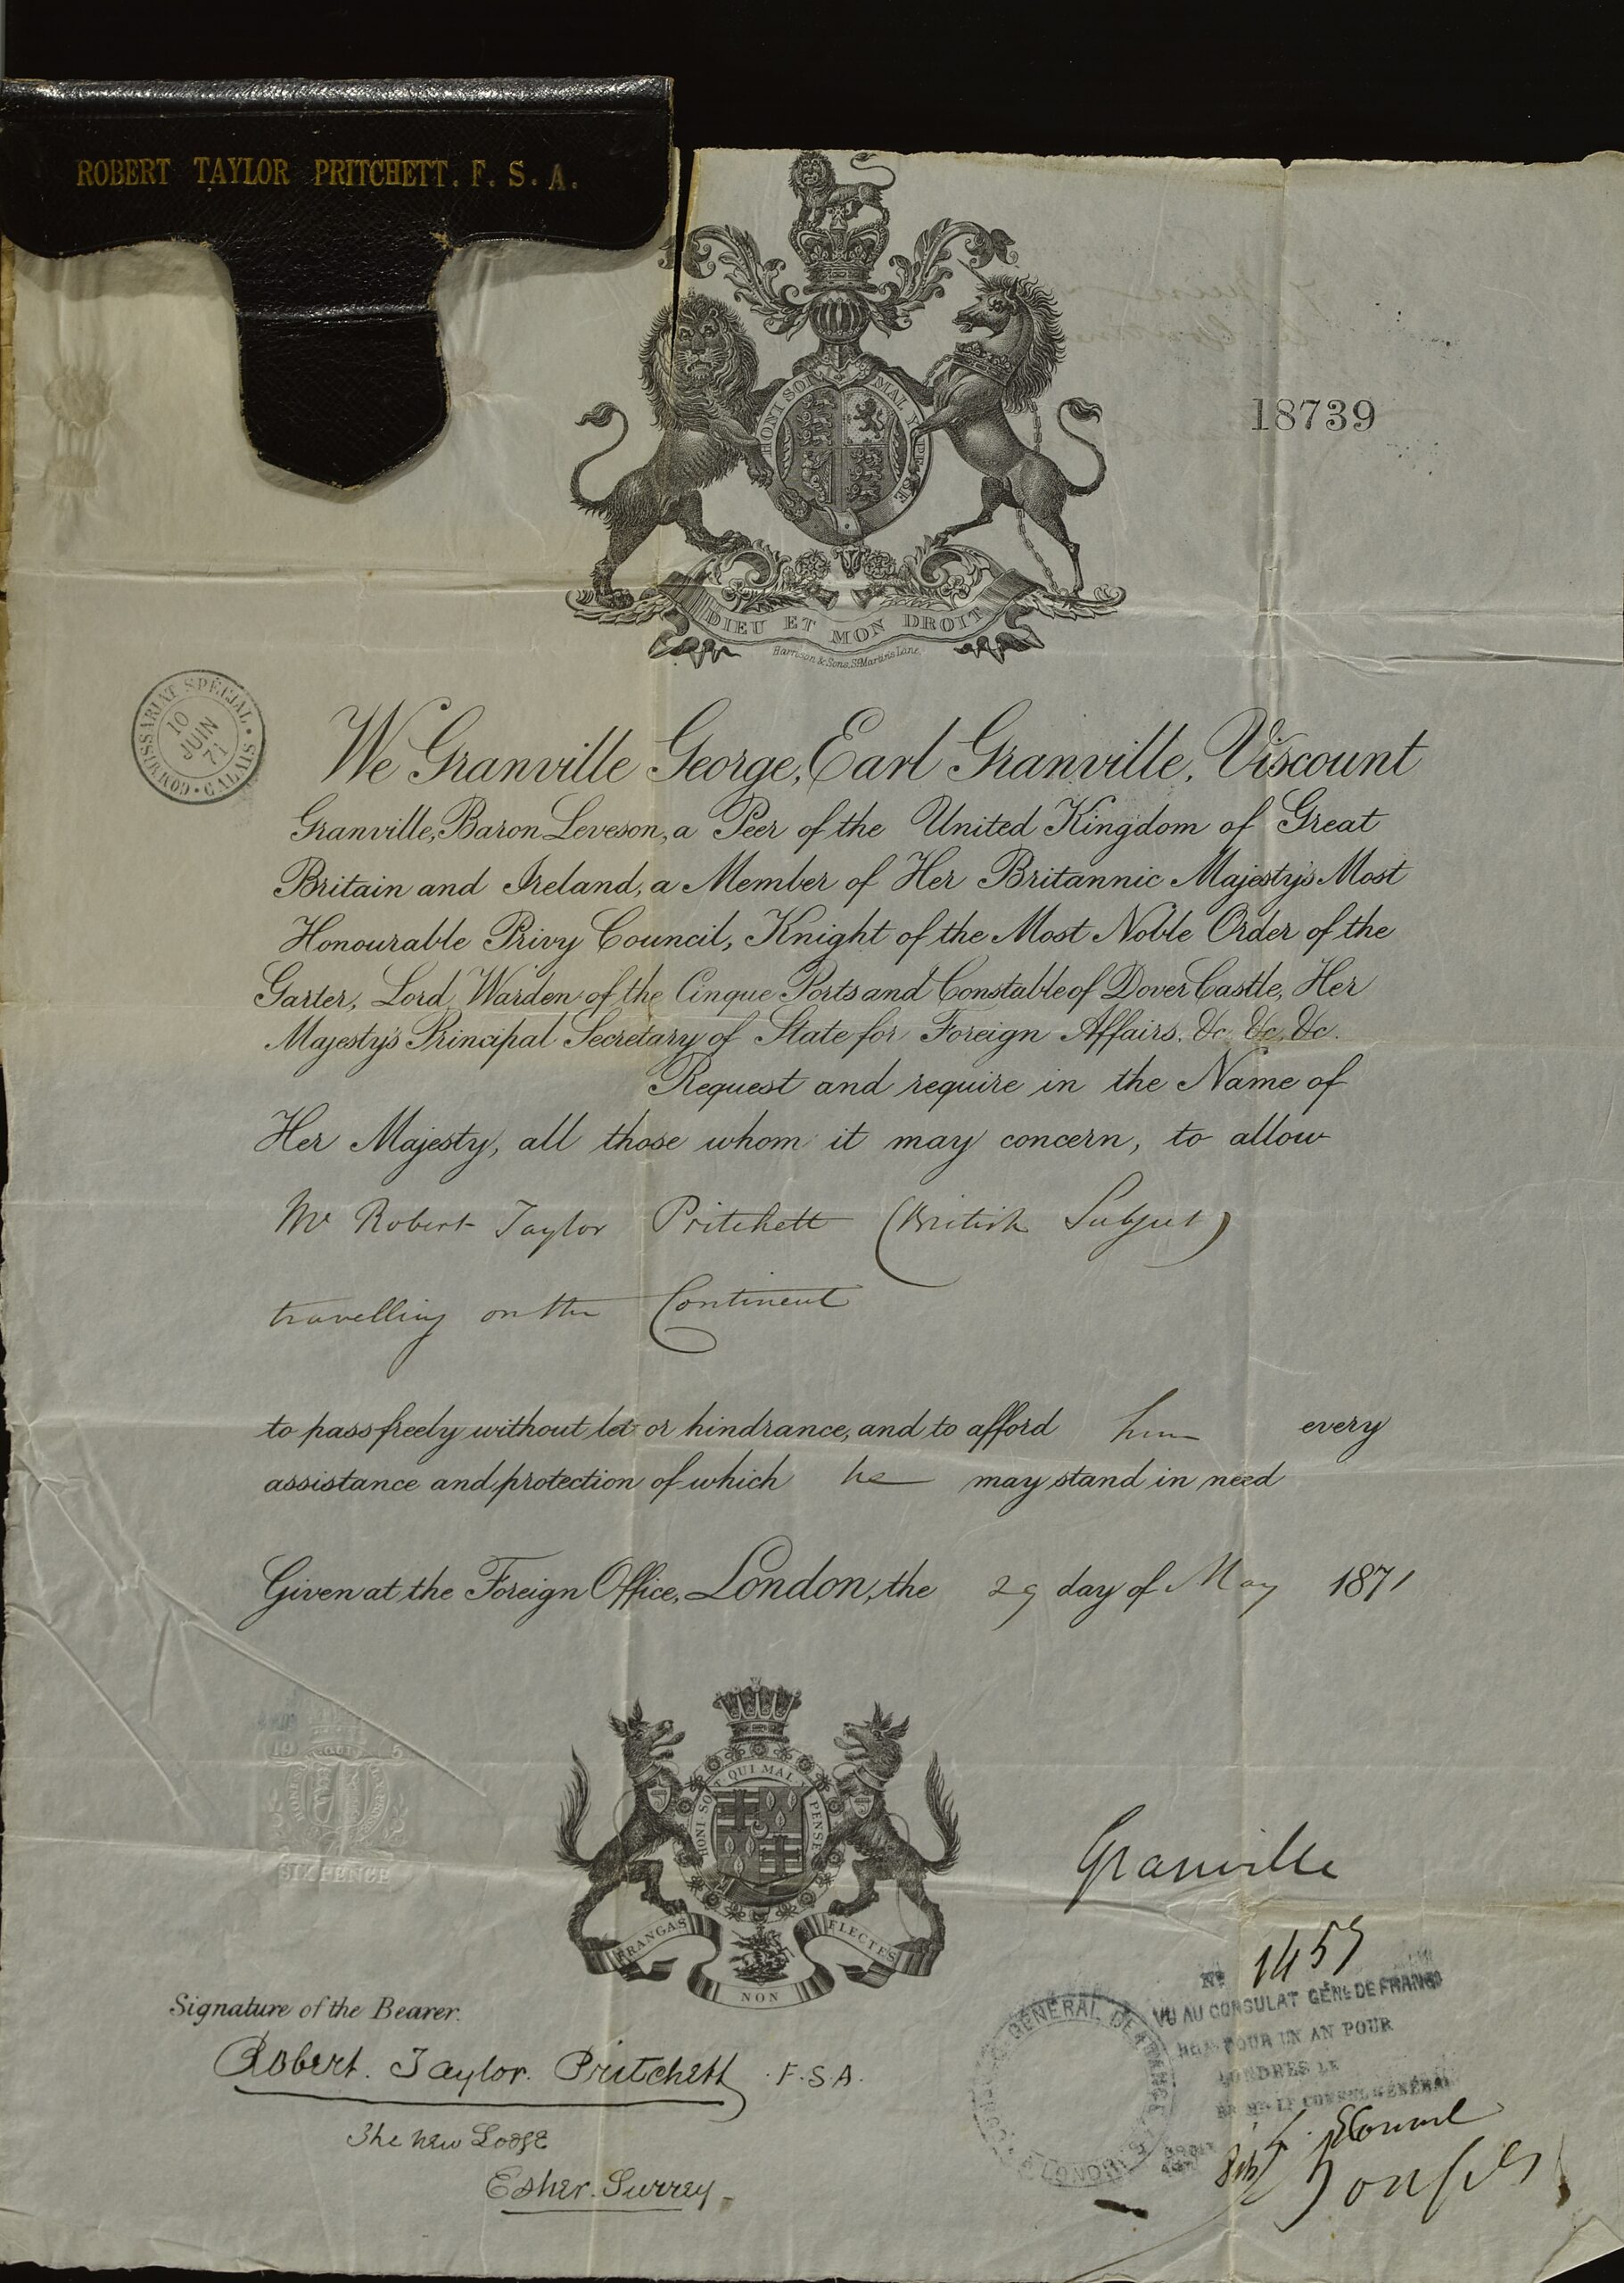 Robert Taylor Pritchett's passport. Inside the black leather case is a flimsy paper document allowing Pritchett's travel on the Continent, signed by him with the address The New Lodge, Esher, Surrey. It is dated 25th May 1871.